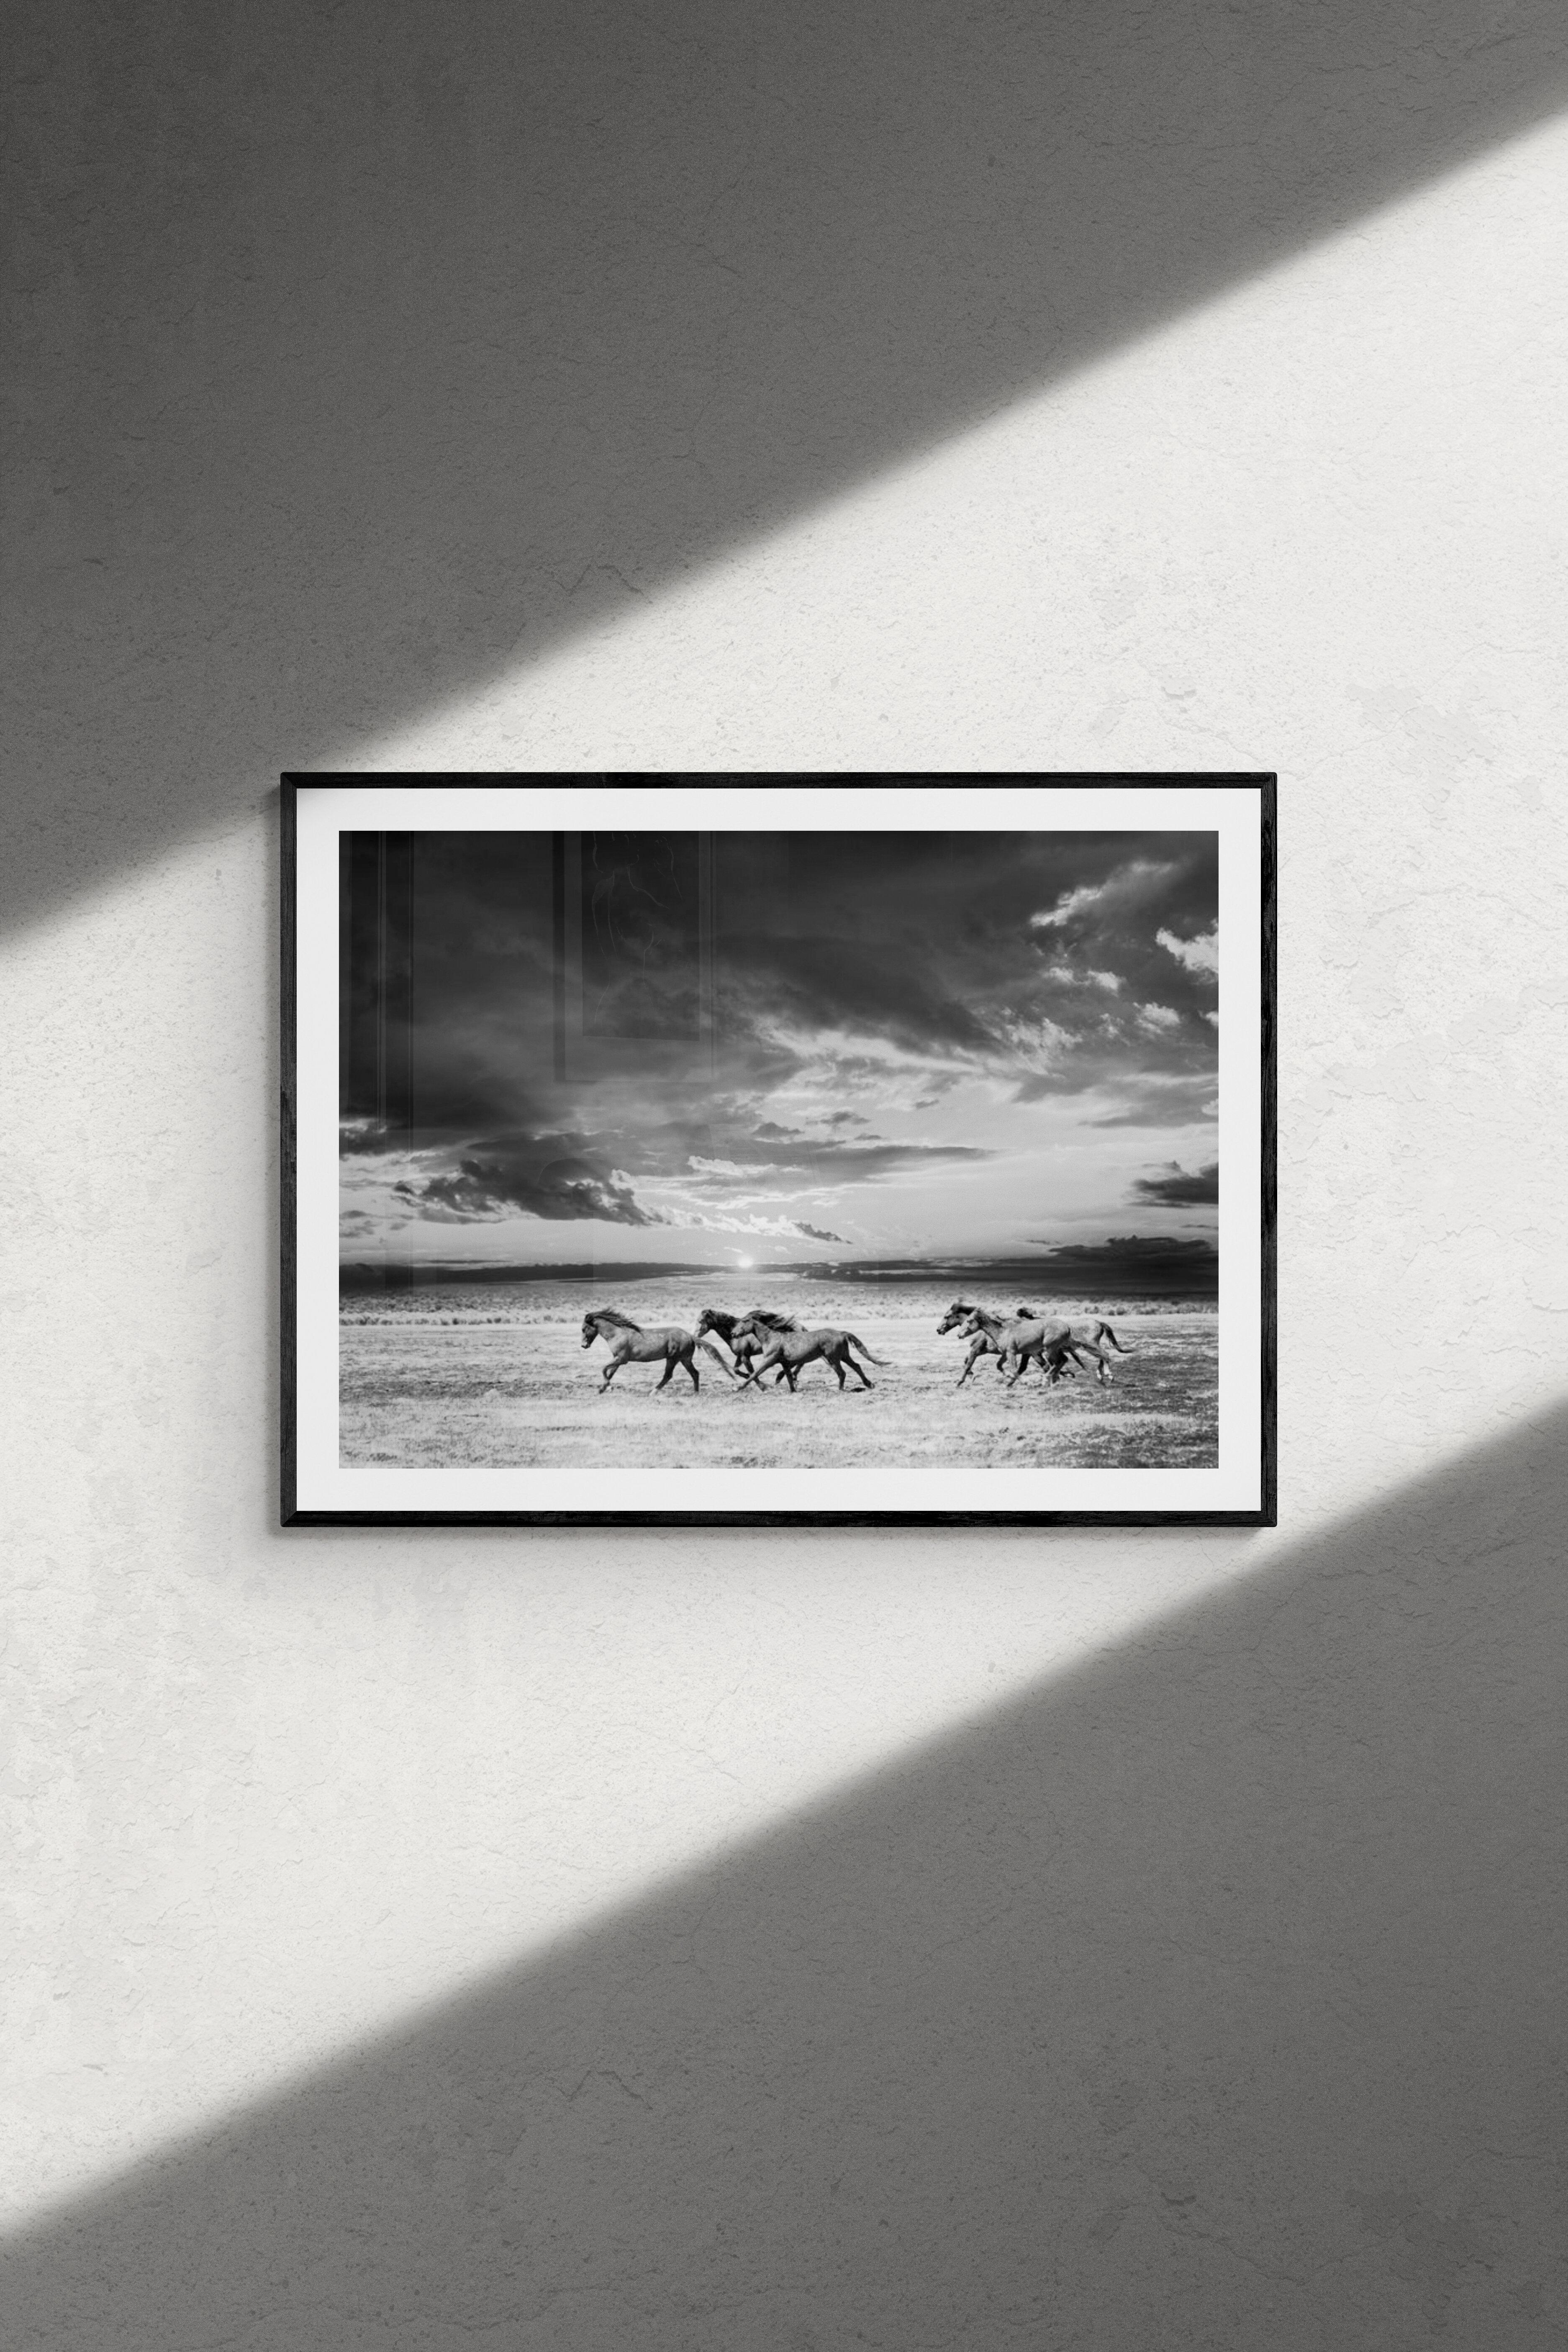 Chasing the Light- 28x40 Black & White Photography Wild Horses Mustangs Signé - Print de Shane Russeck